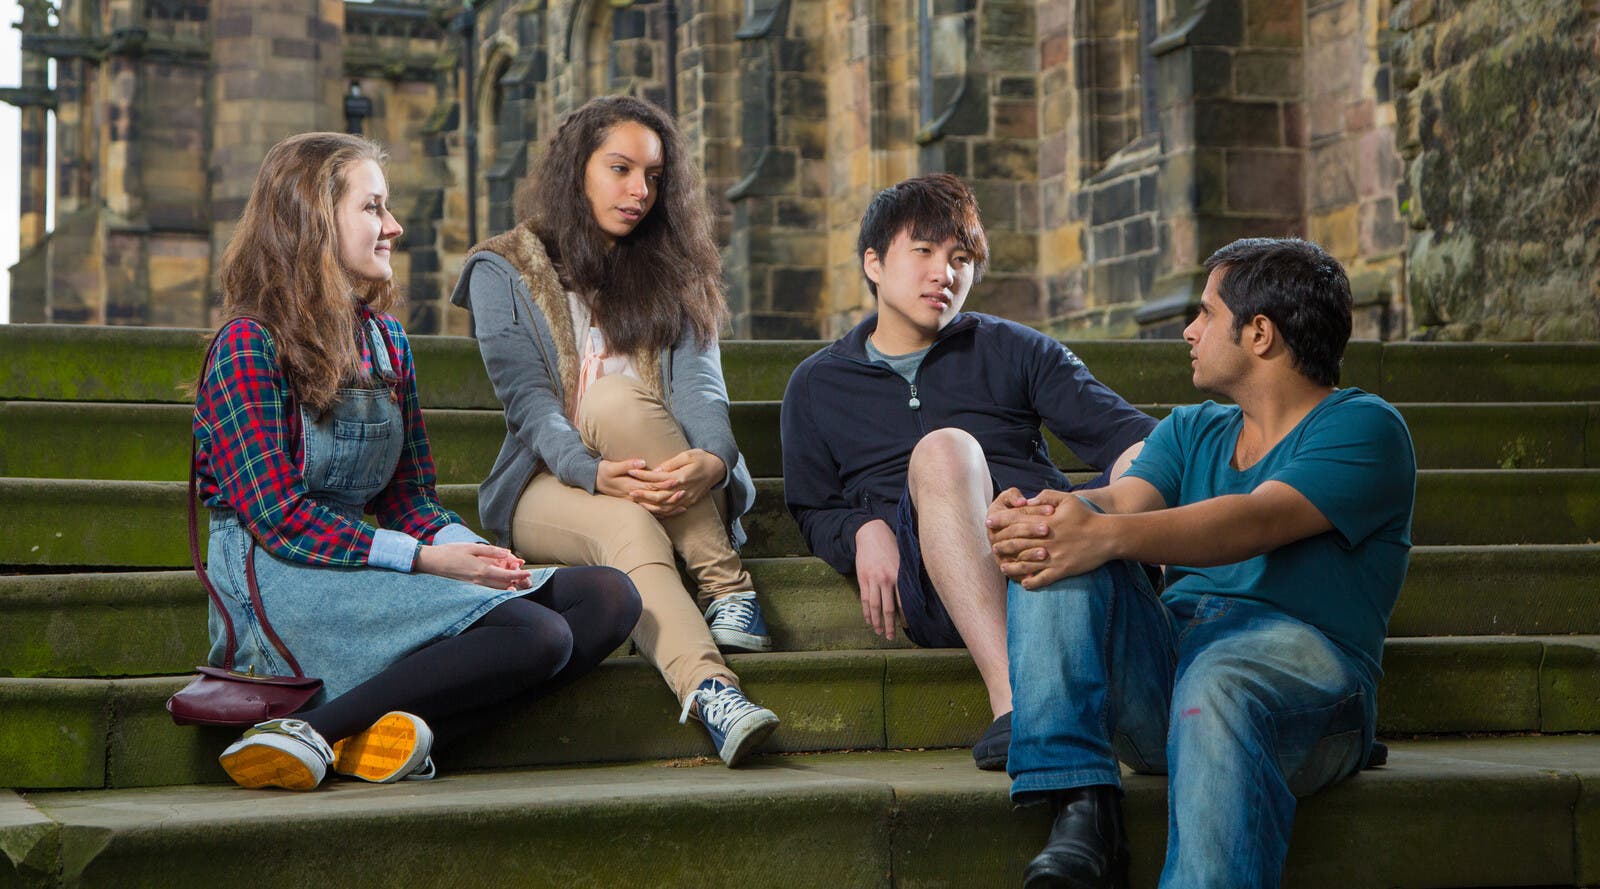 A group of students sit outside talking